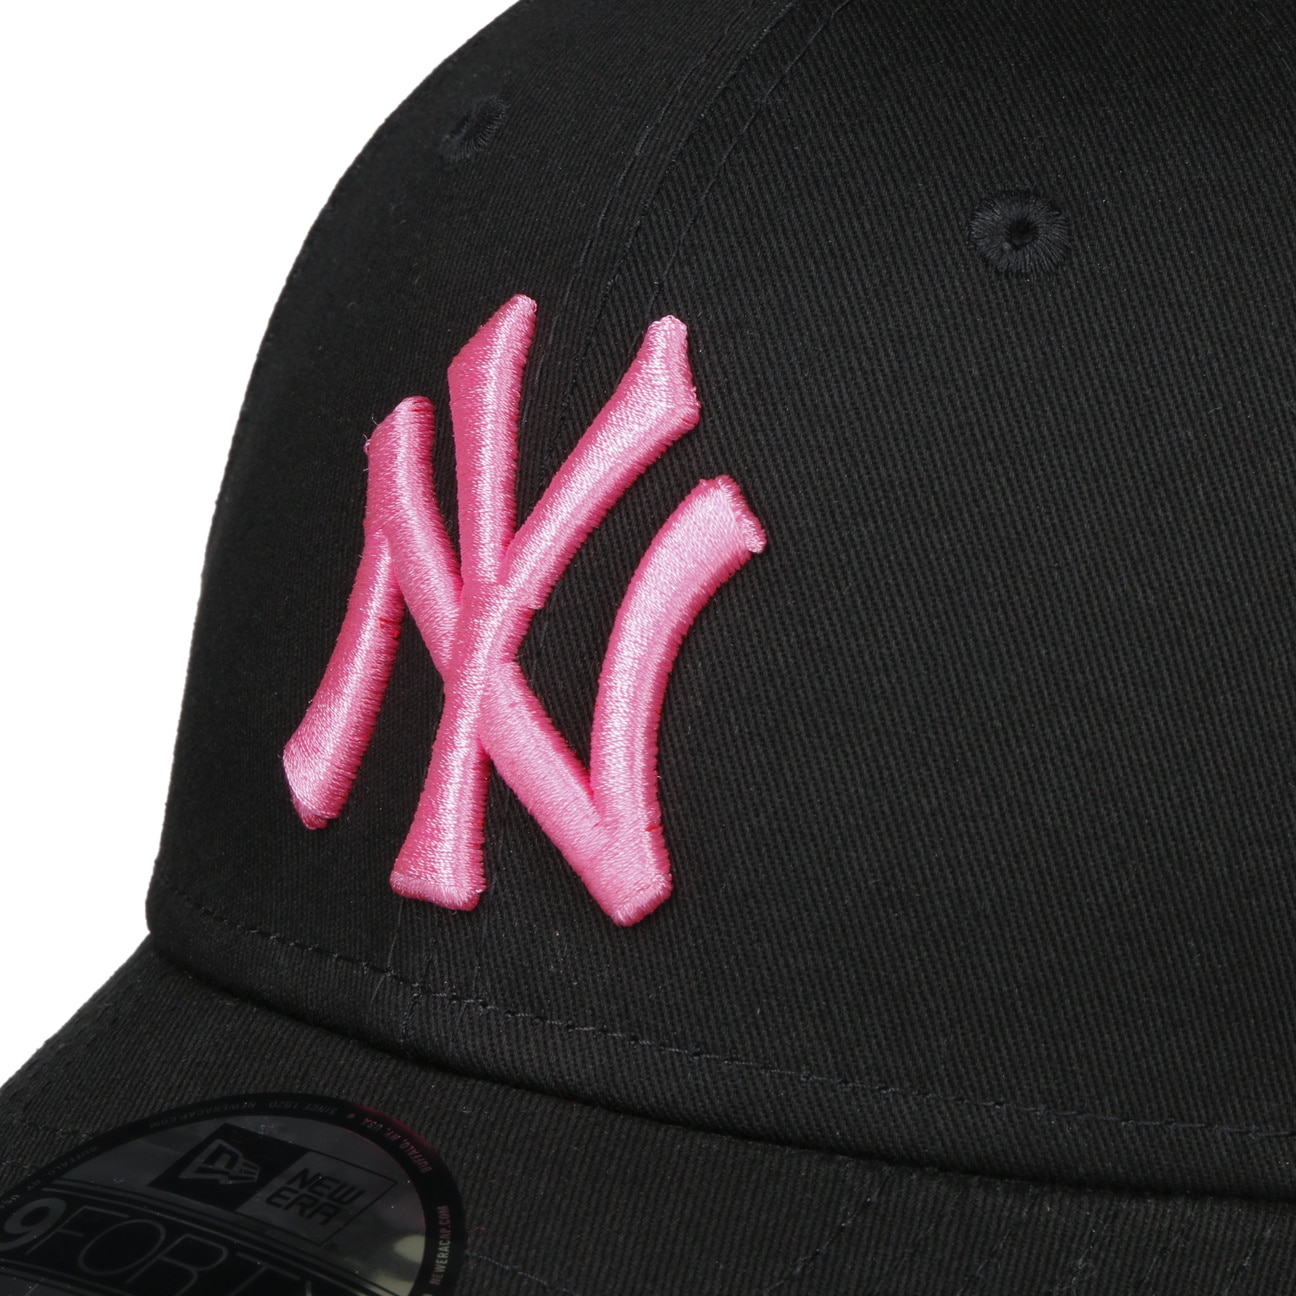 Yankees by 32,95 9Forty MLB Cap € New - Era Neon